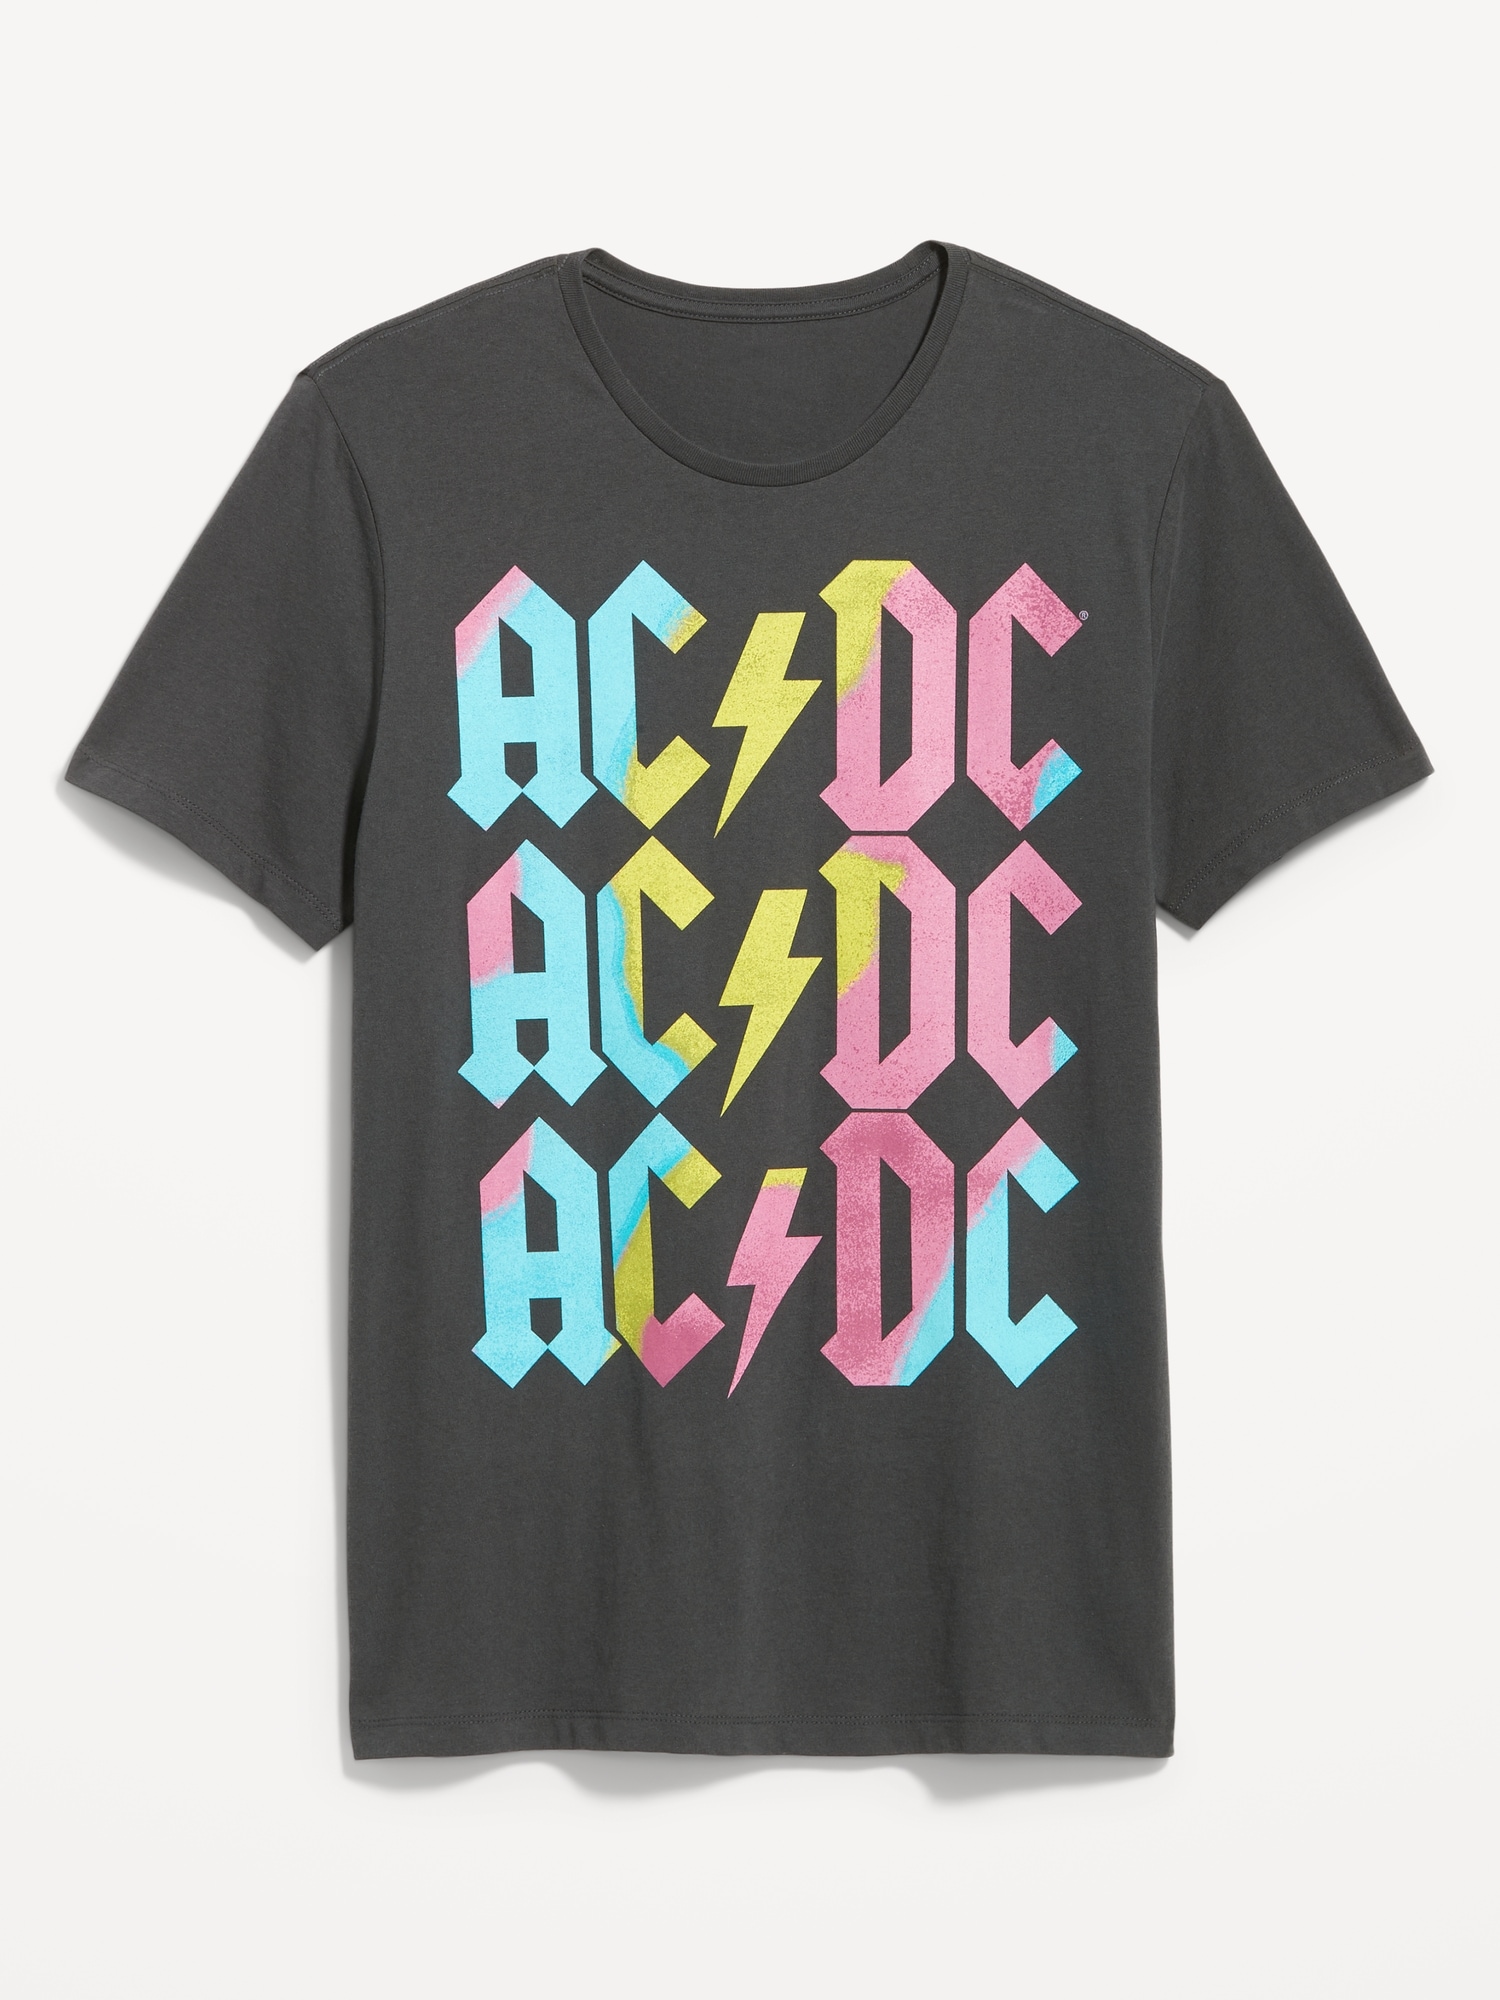 Acdc™ Gender Neutral T Shirt For Adults Old Navy